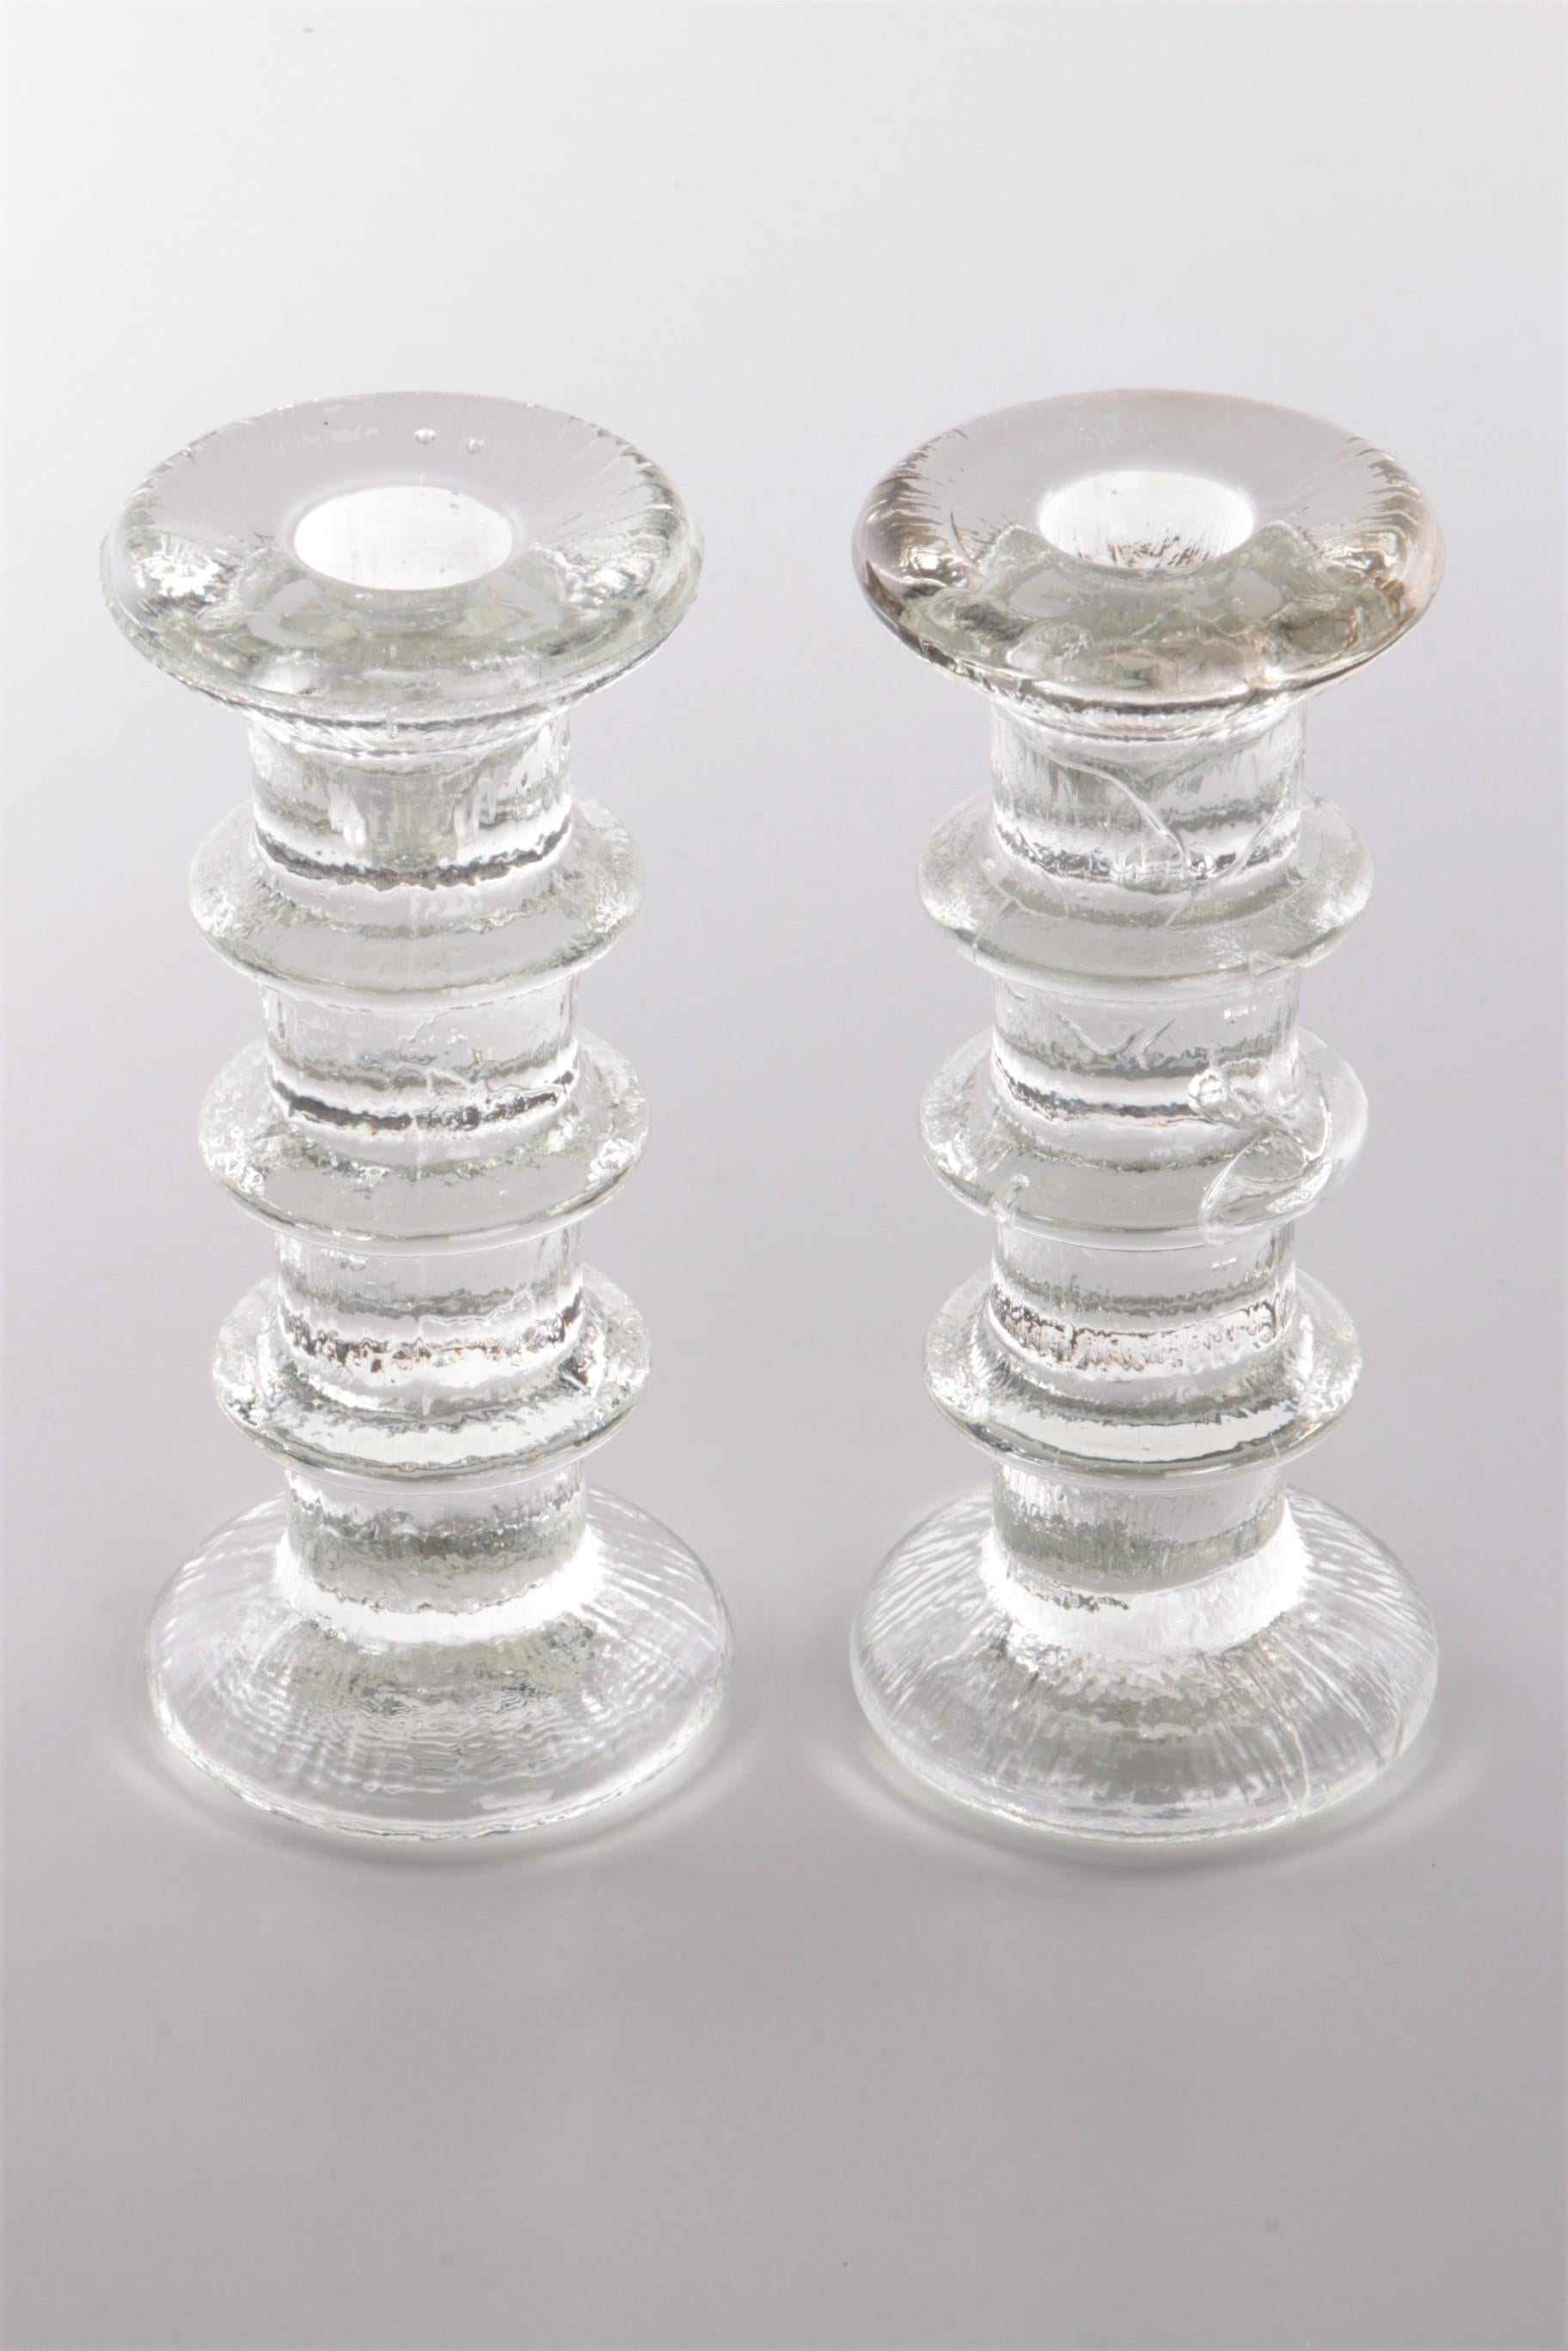 Vintage set of 2 glass candlesticks Design by Staffan Gellerstedt 1960s


A beautiful set of 2 glass candlesticks from Scandinavia: candlestick/candle holder with multiple rings design by Staffan Gellerstedt made by Pukeberg 1966.

This large